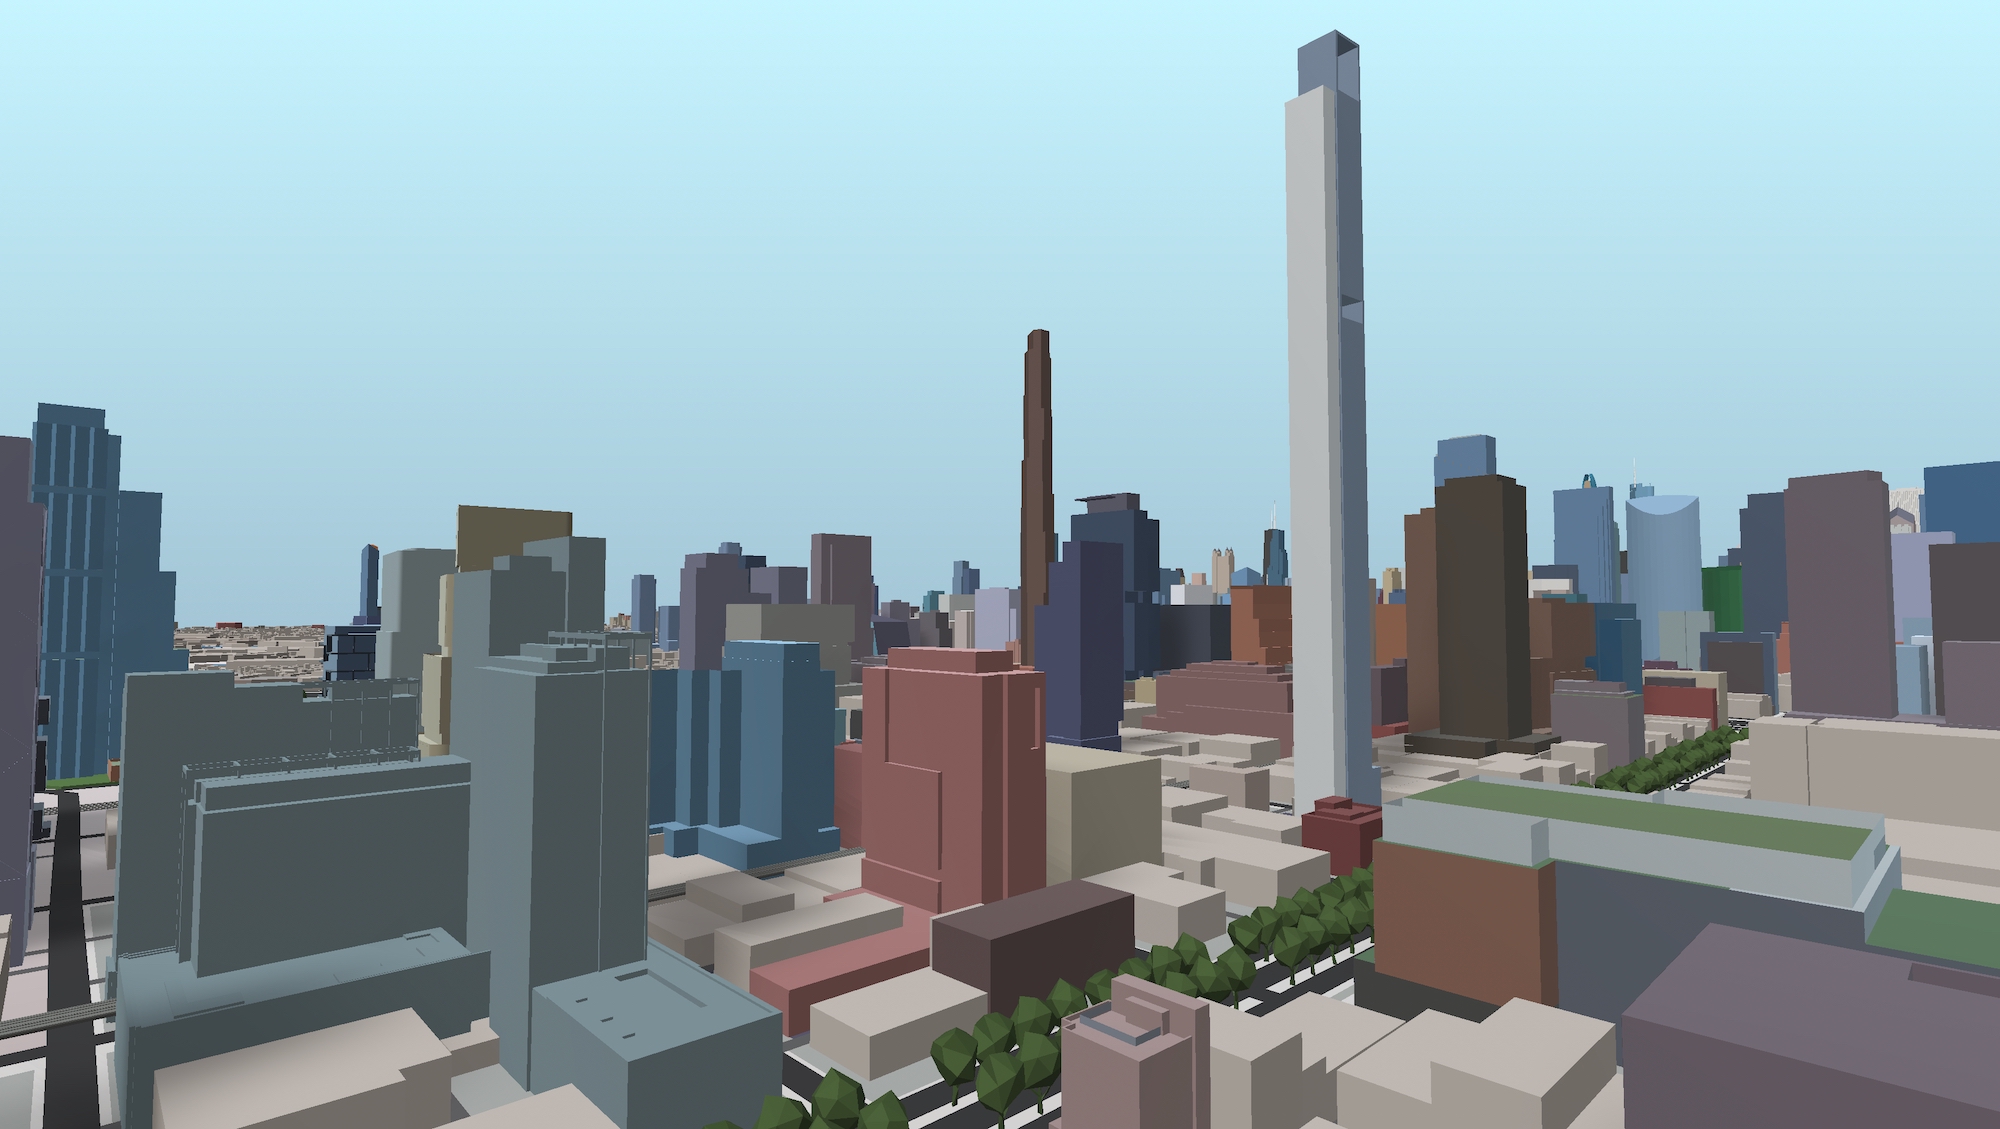 Brooklyn Tower (center) in place of 360 N Green Street. Model by Jack Crawford